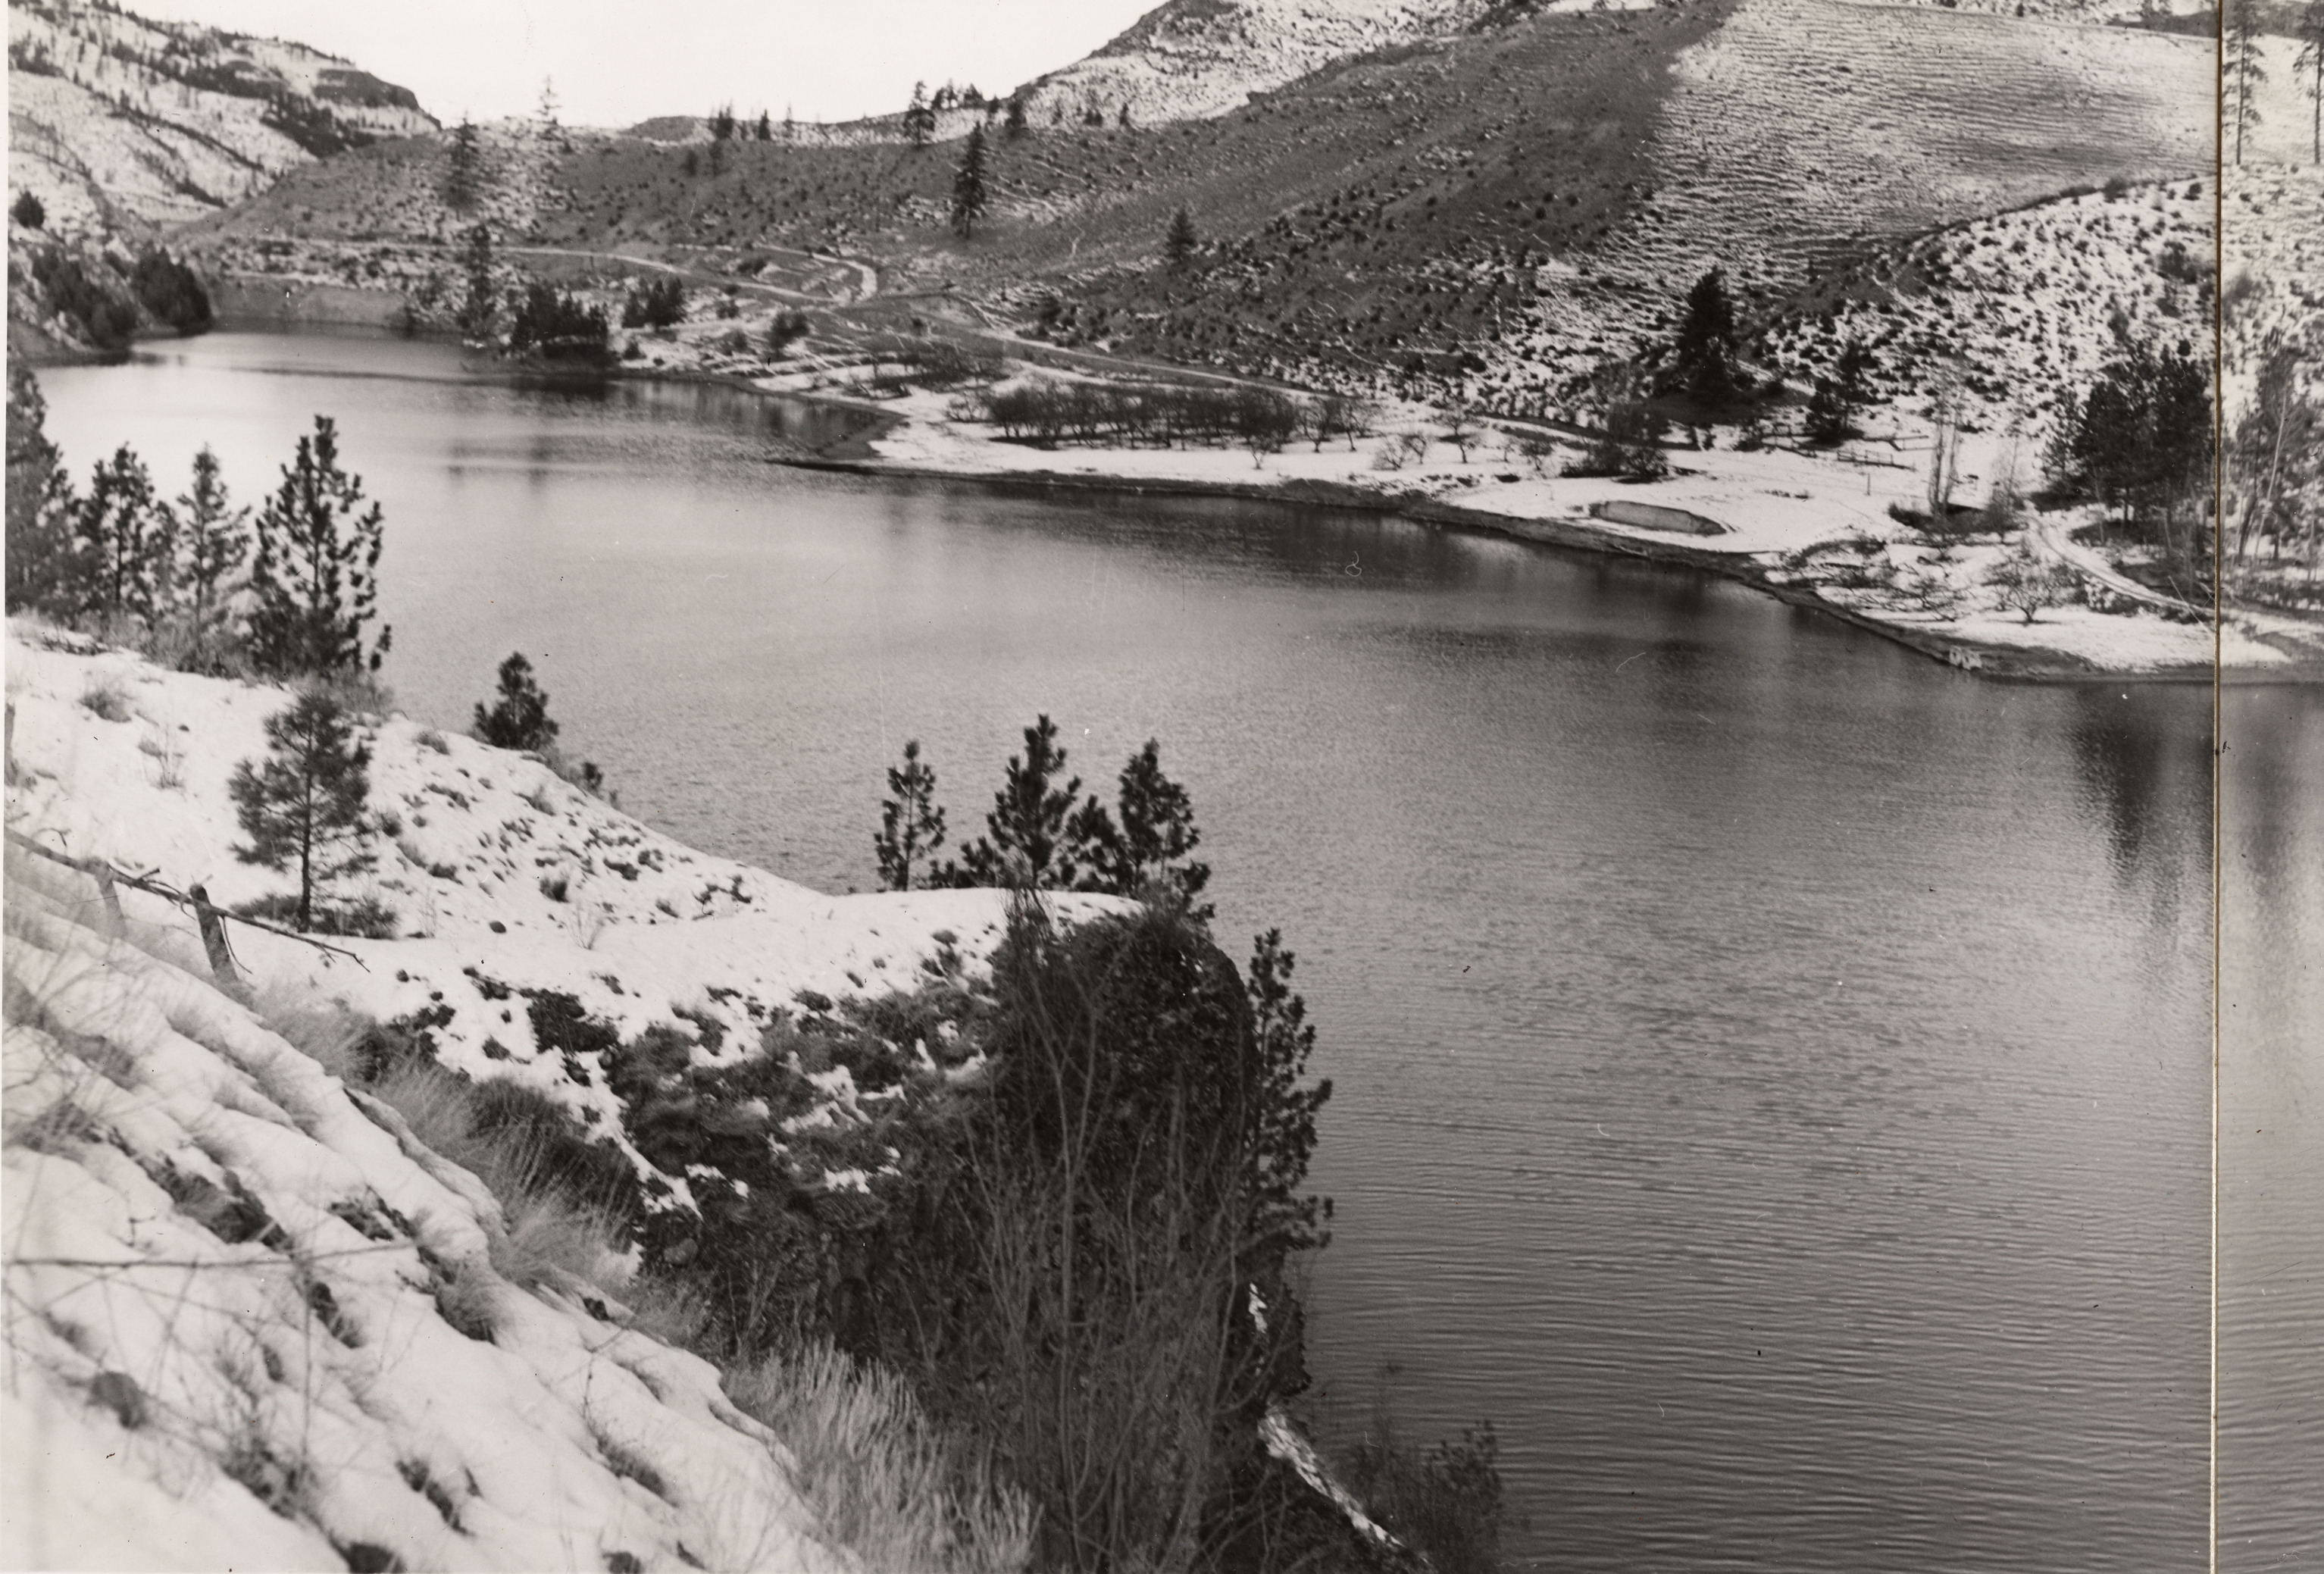 Black and white photograph of a steep, snowy cliff next to a body of water